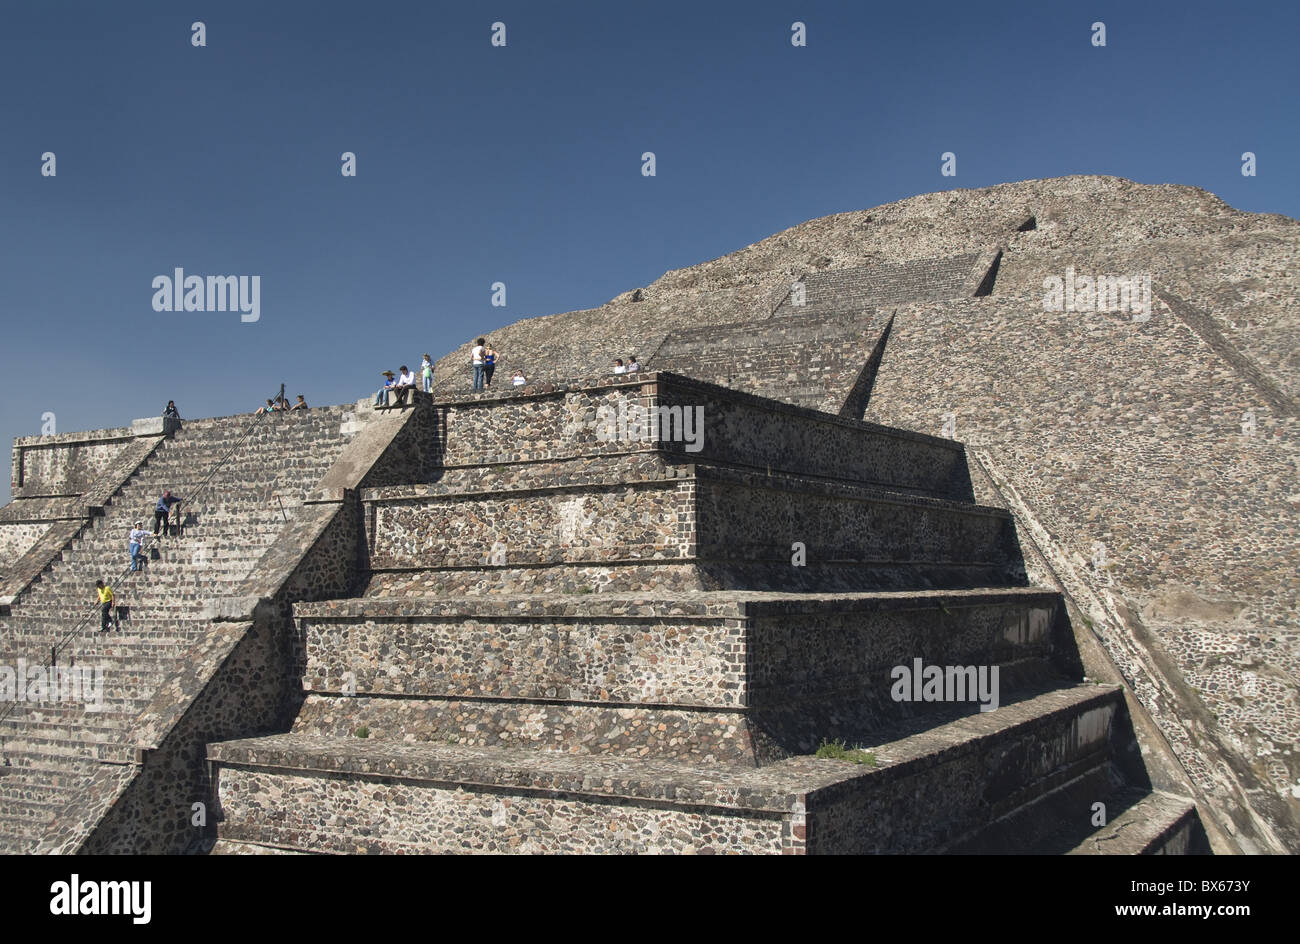 Tourists climbing stairway, Pyramid of the Moon, Archaeological Zone of ...